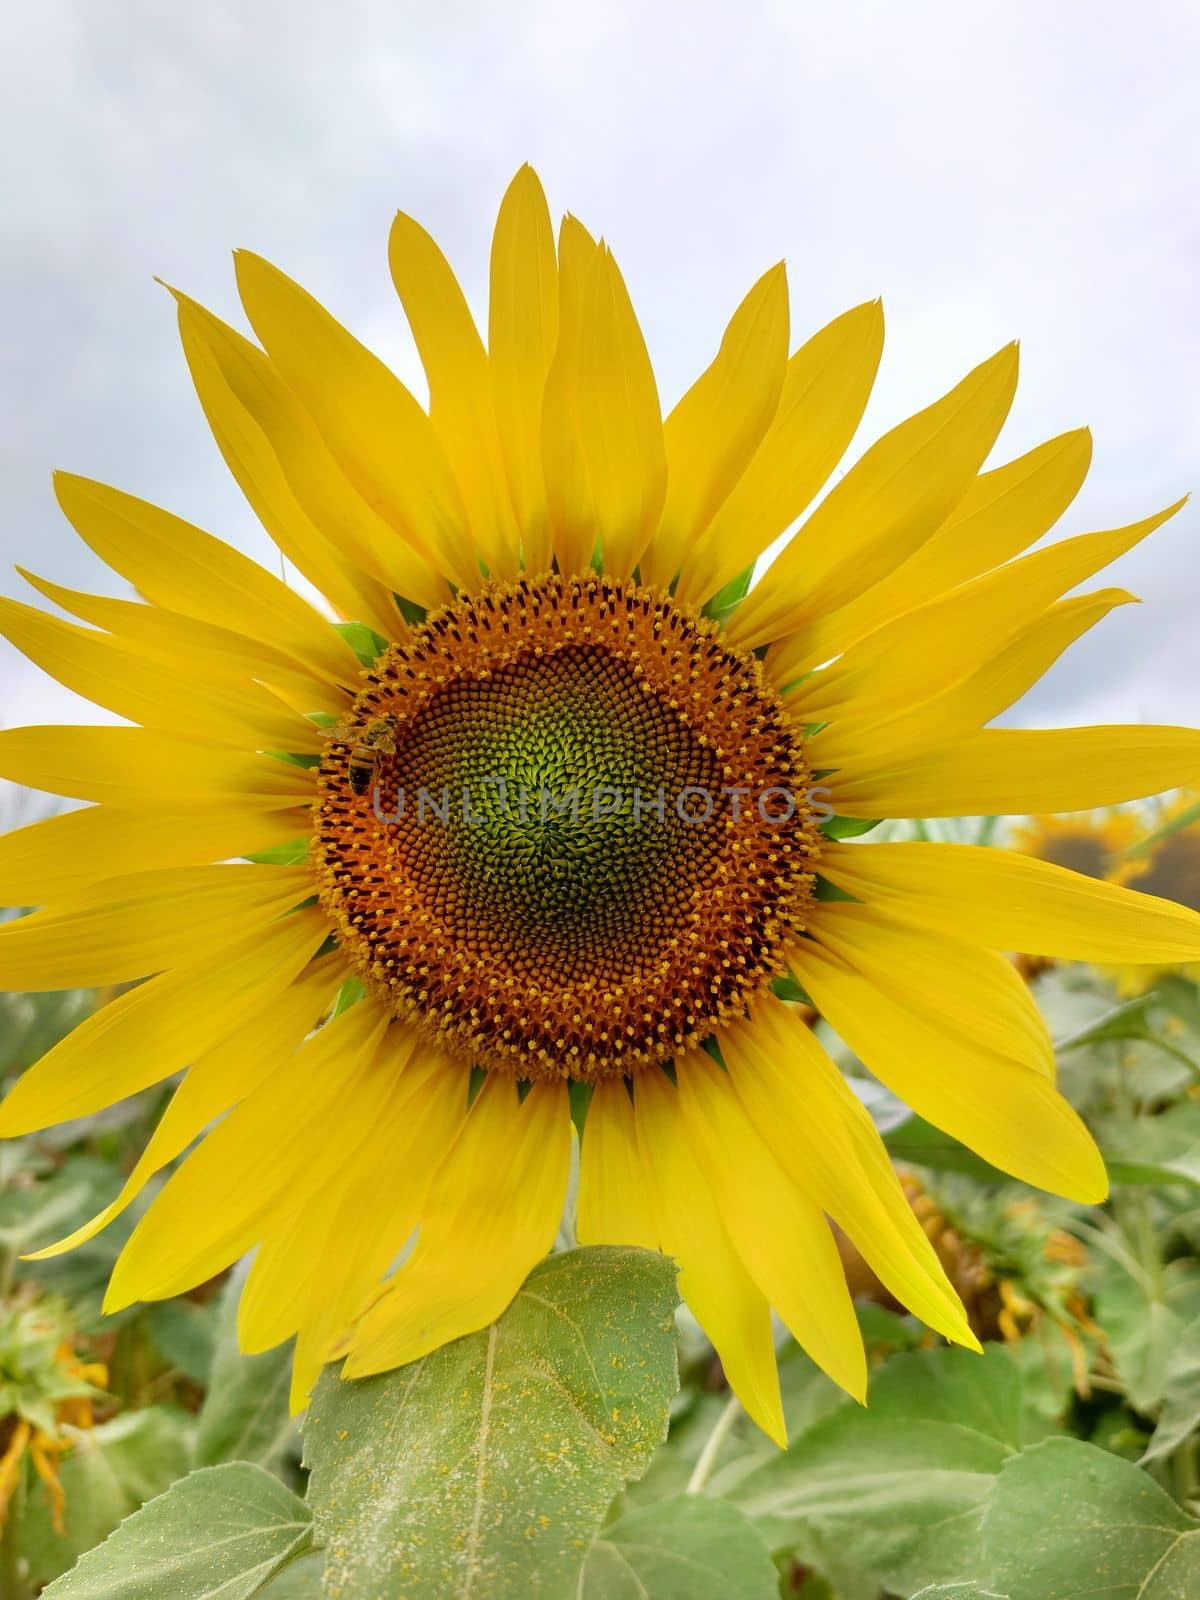 Yellow sunflower in full bloom on a cloudy day by Mastak80